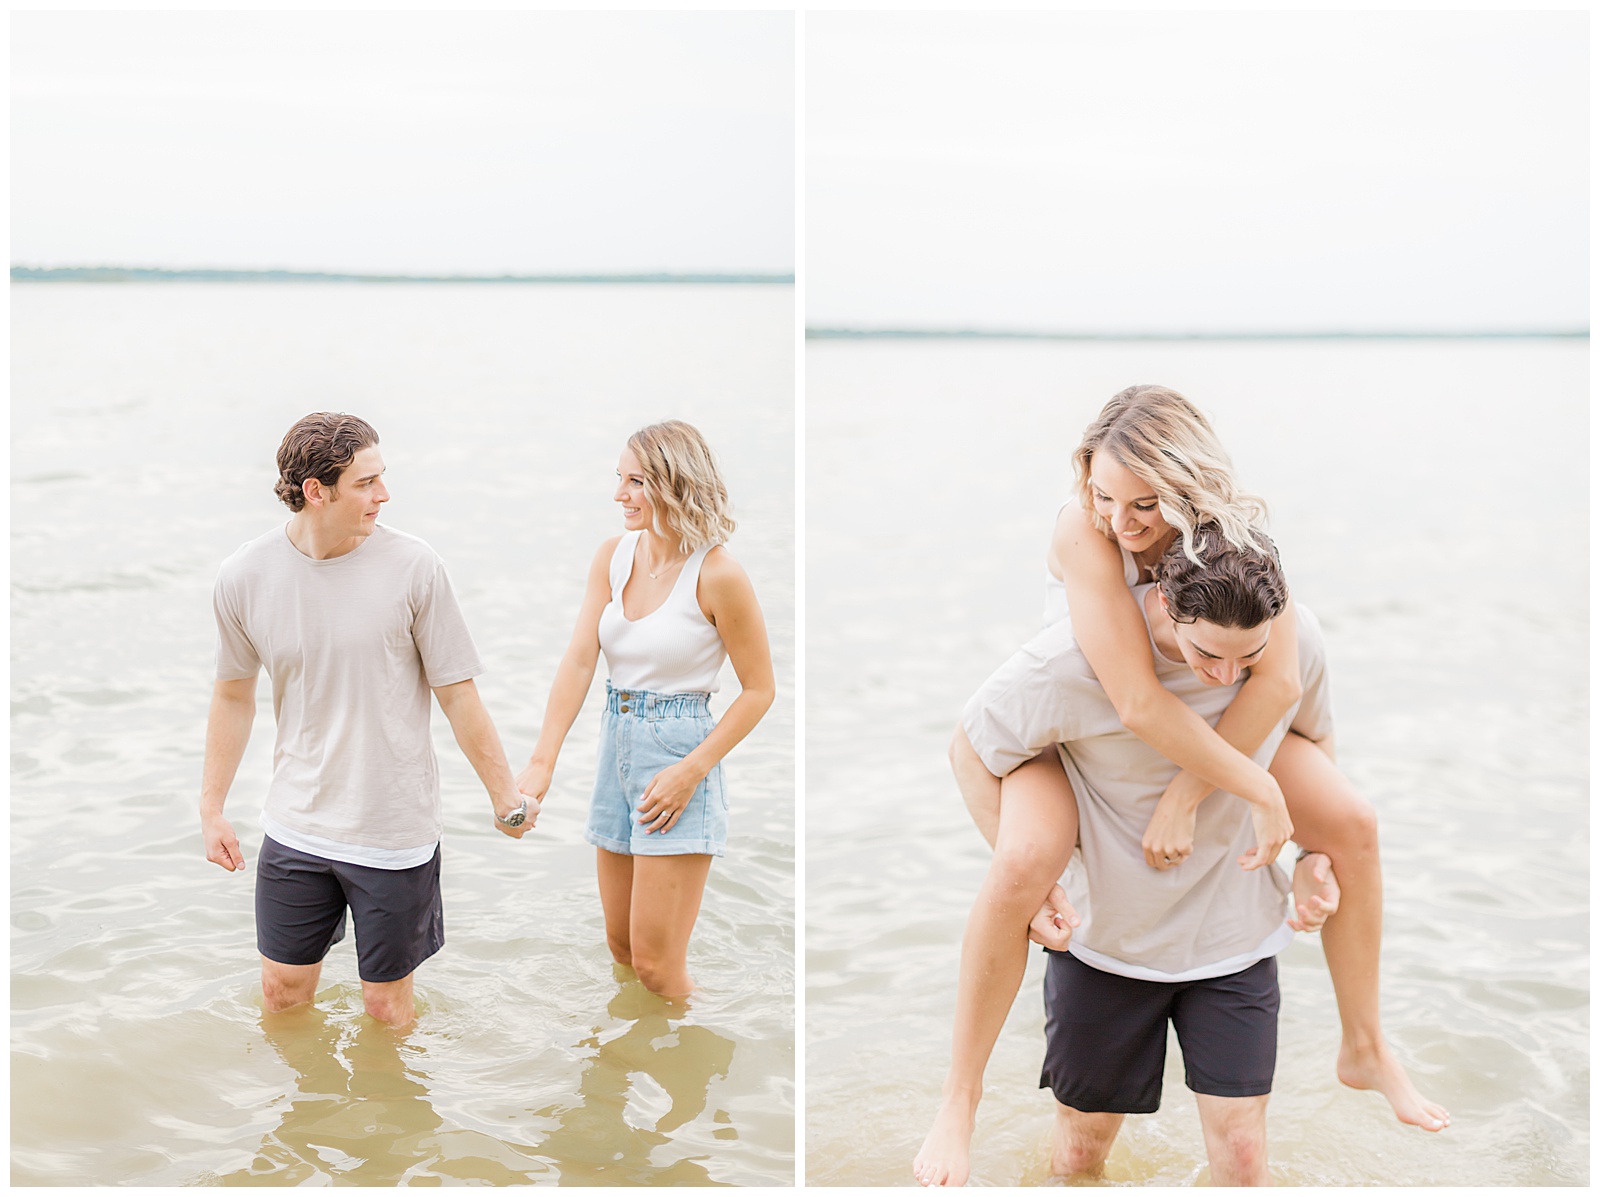 Engagement session outfit inspiration